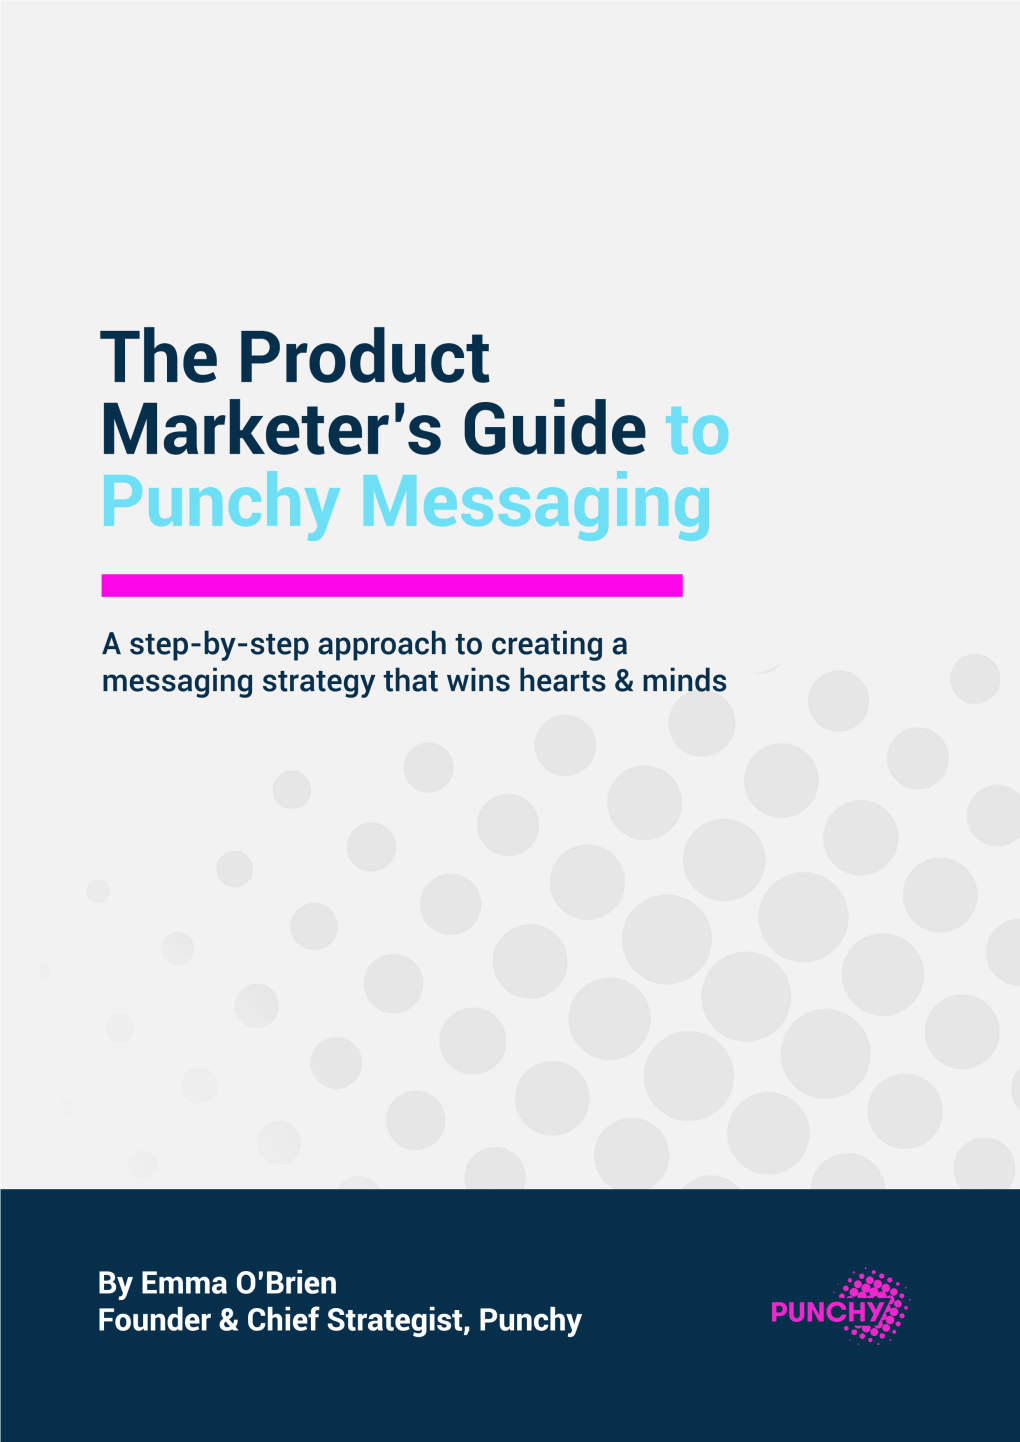 The Product Marketer's Guide to Punchy Messaging